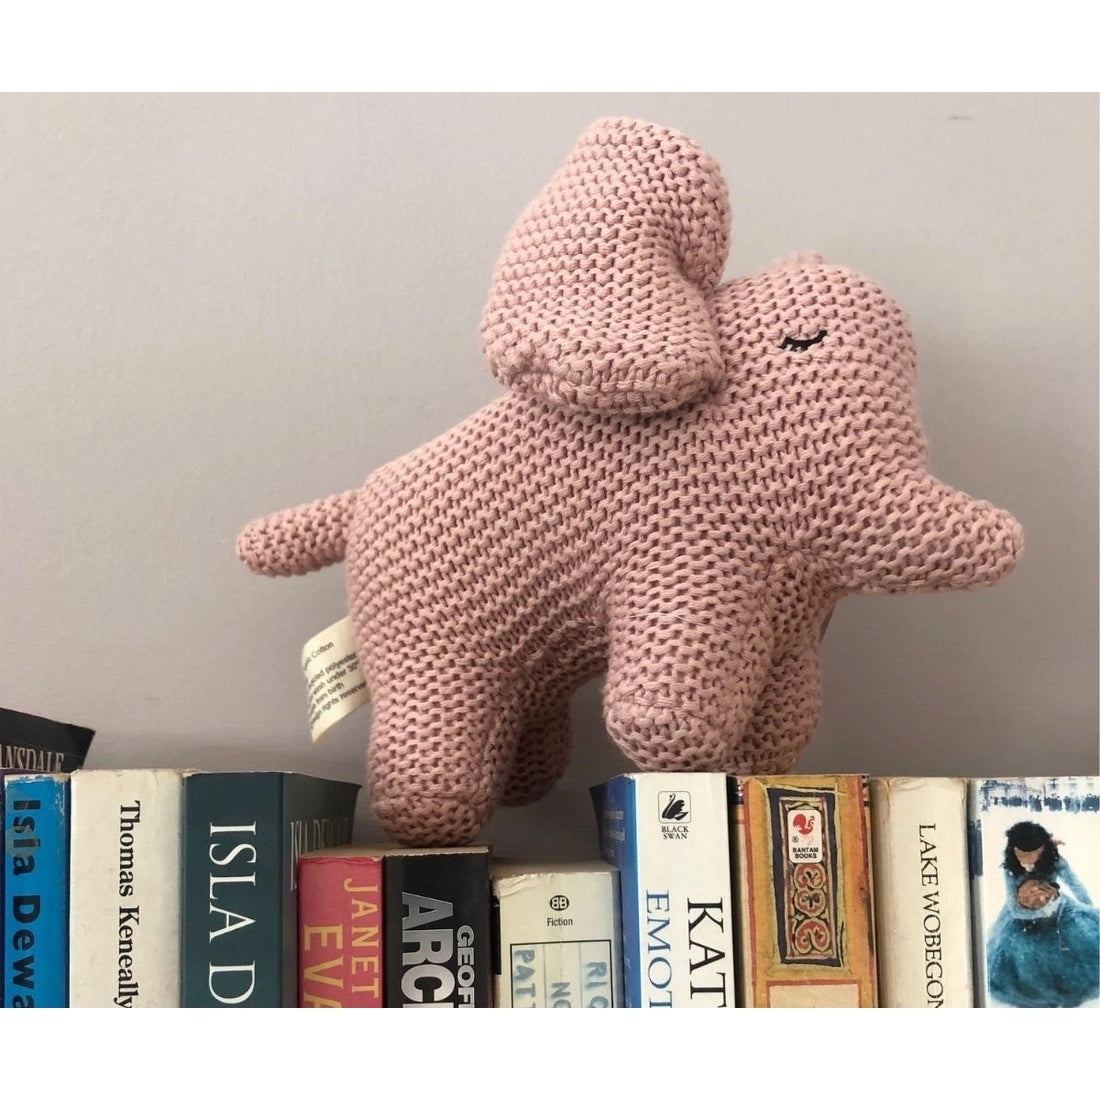 Small Pink Elephant on Books